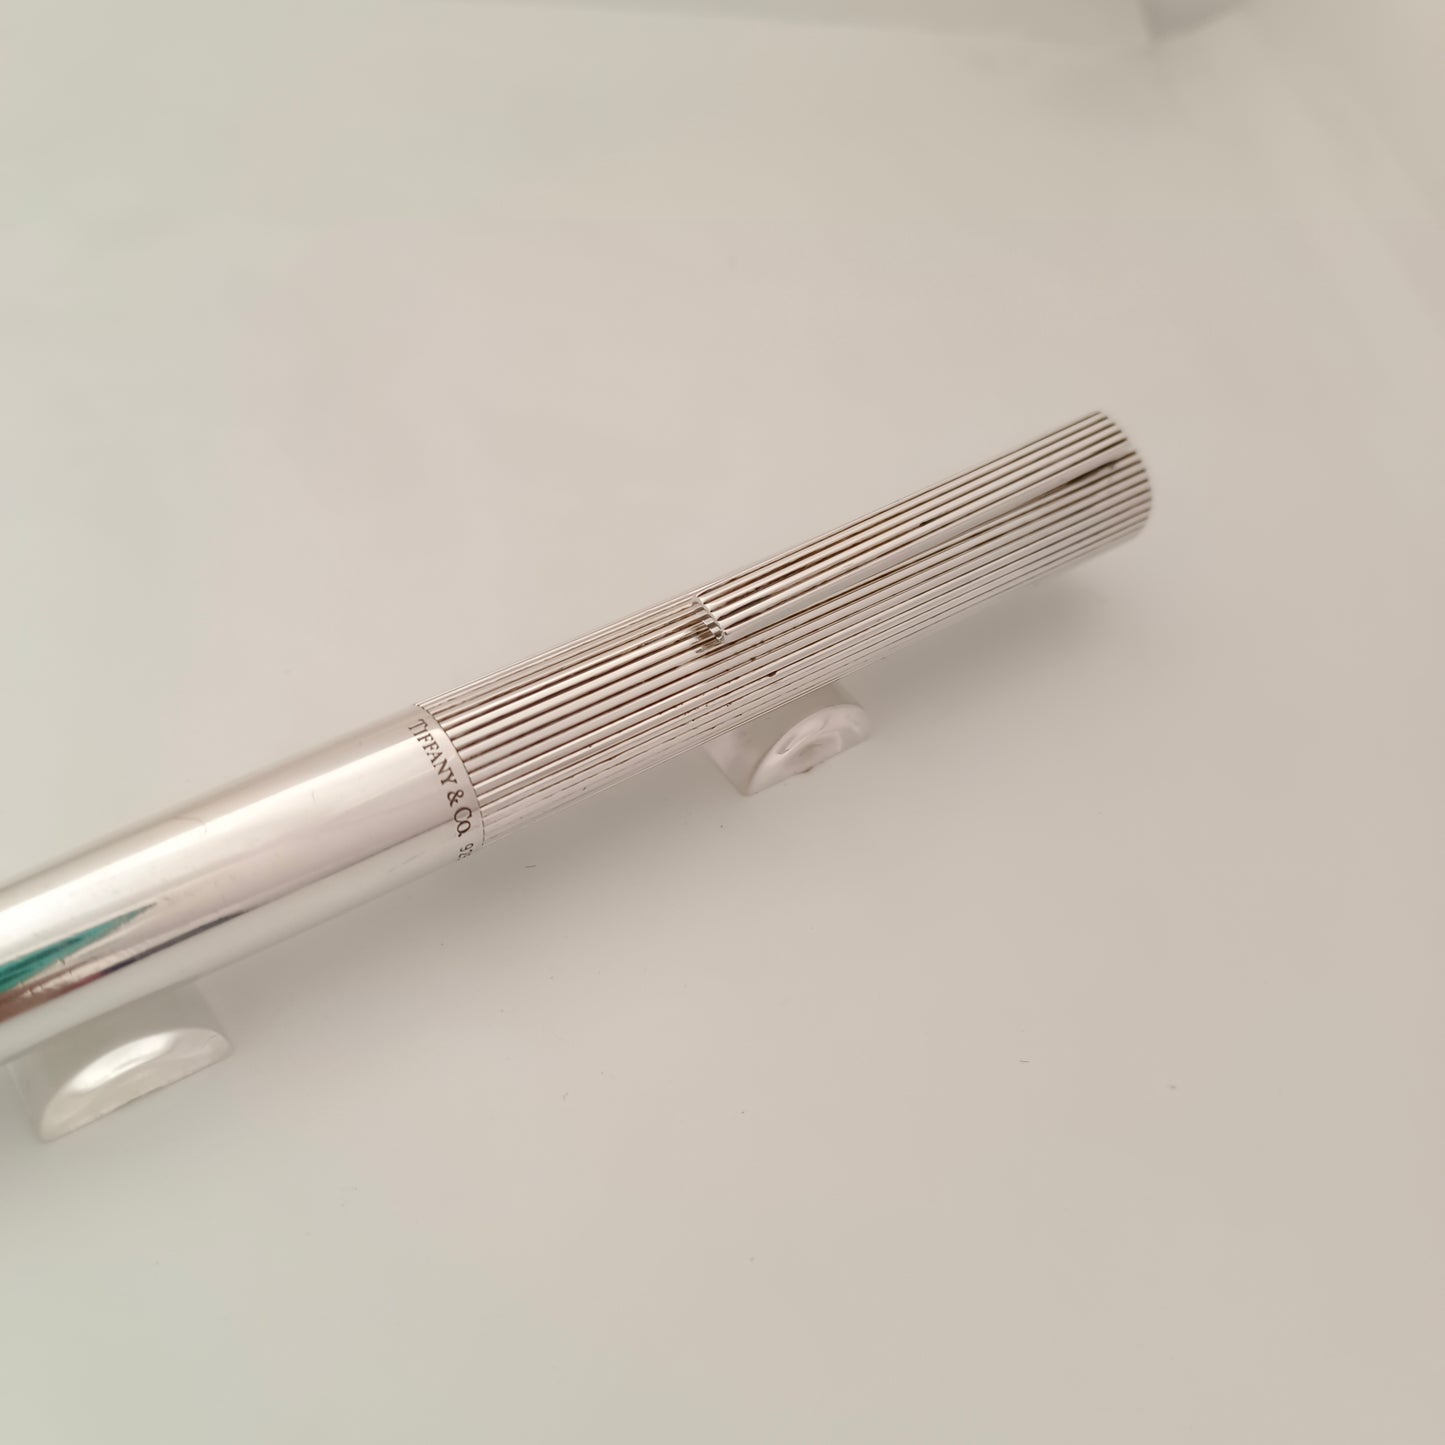 Vintage Tiffany & Co Ballpoint Pen Sterling Silver, Pins Stripe Design Made in Germany